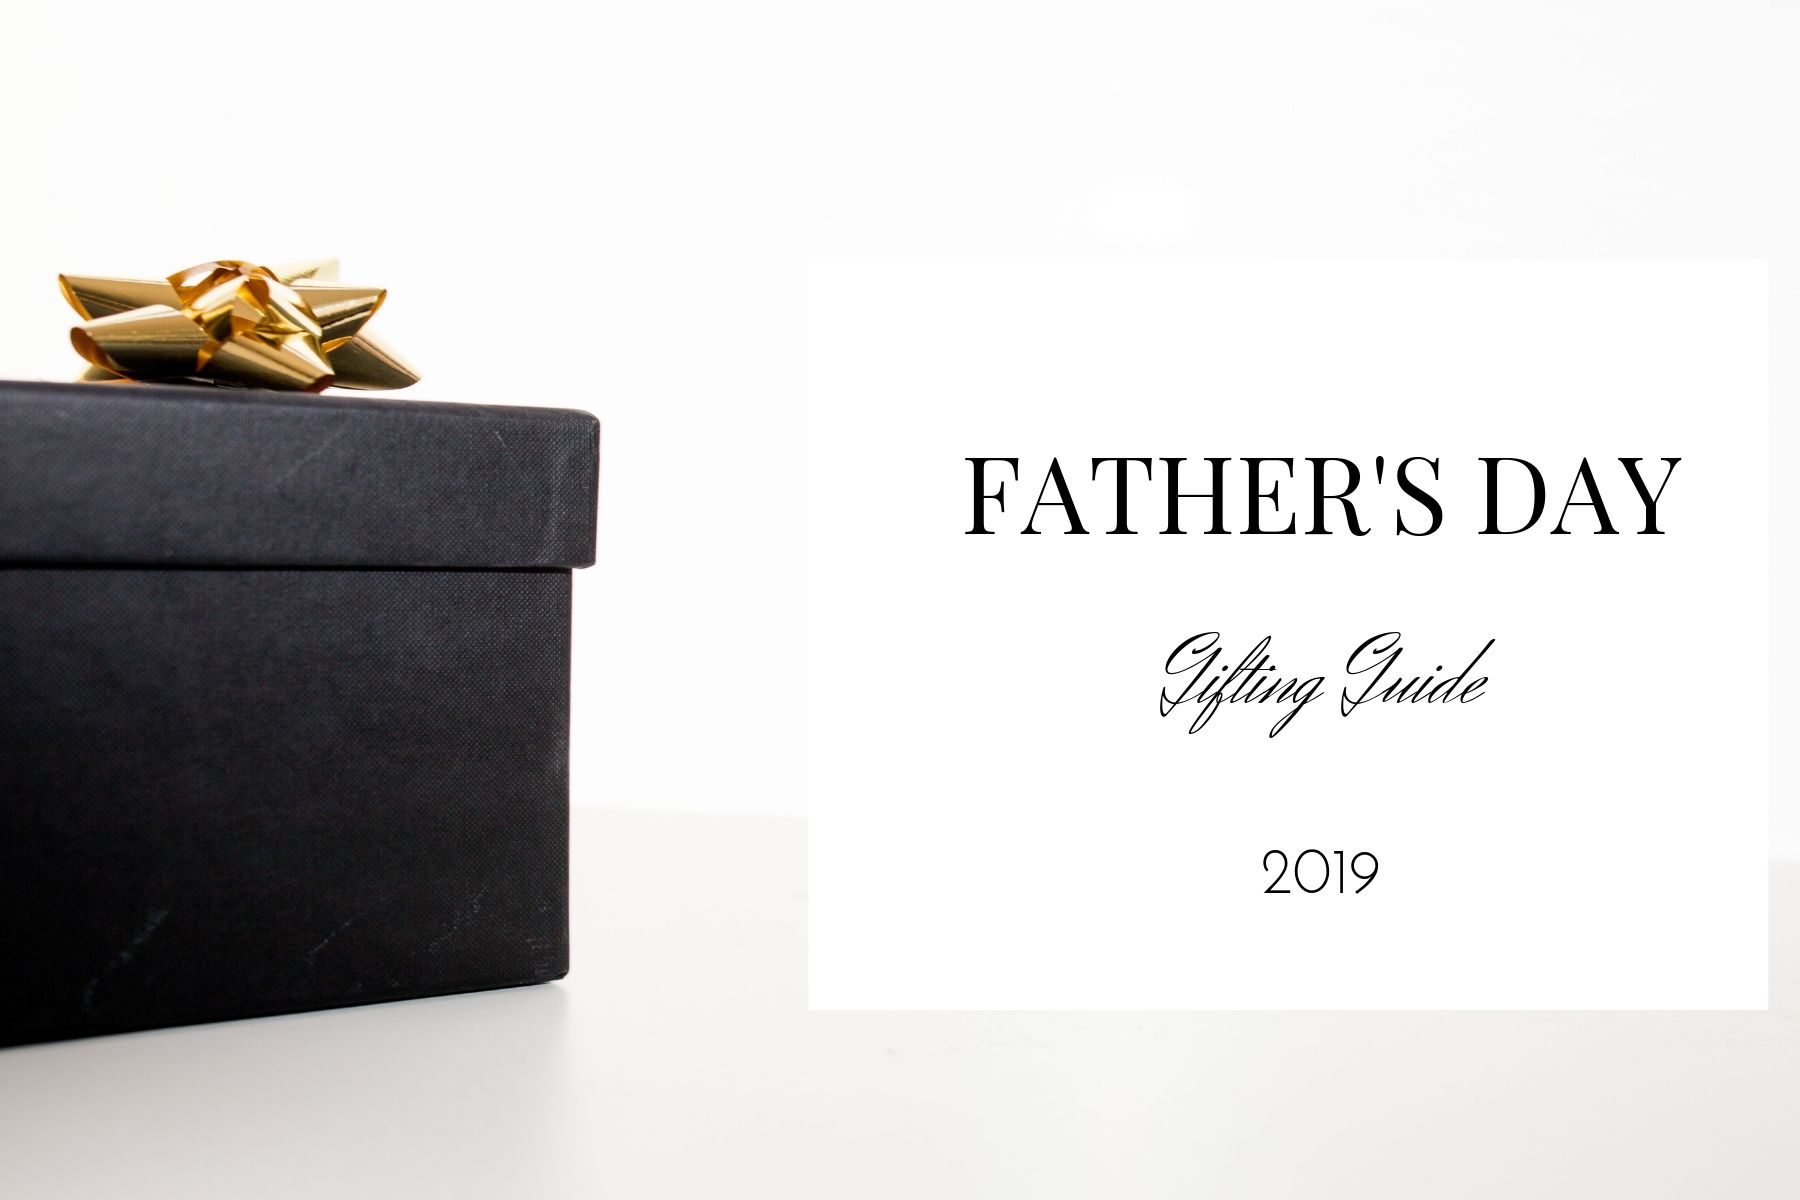 Home Artisan Father's Day Gifting Guide 2019